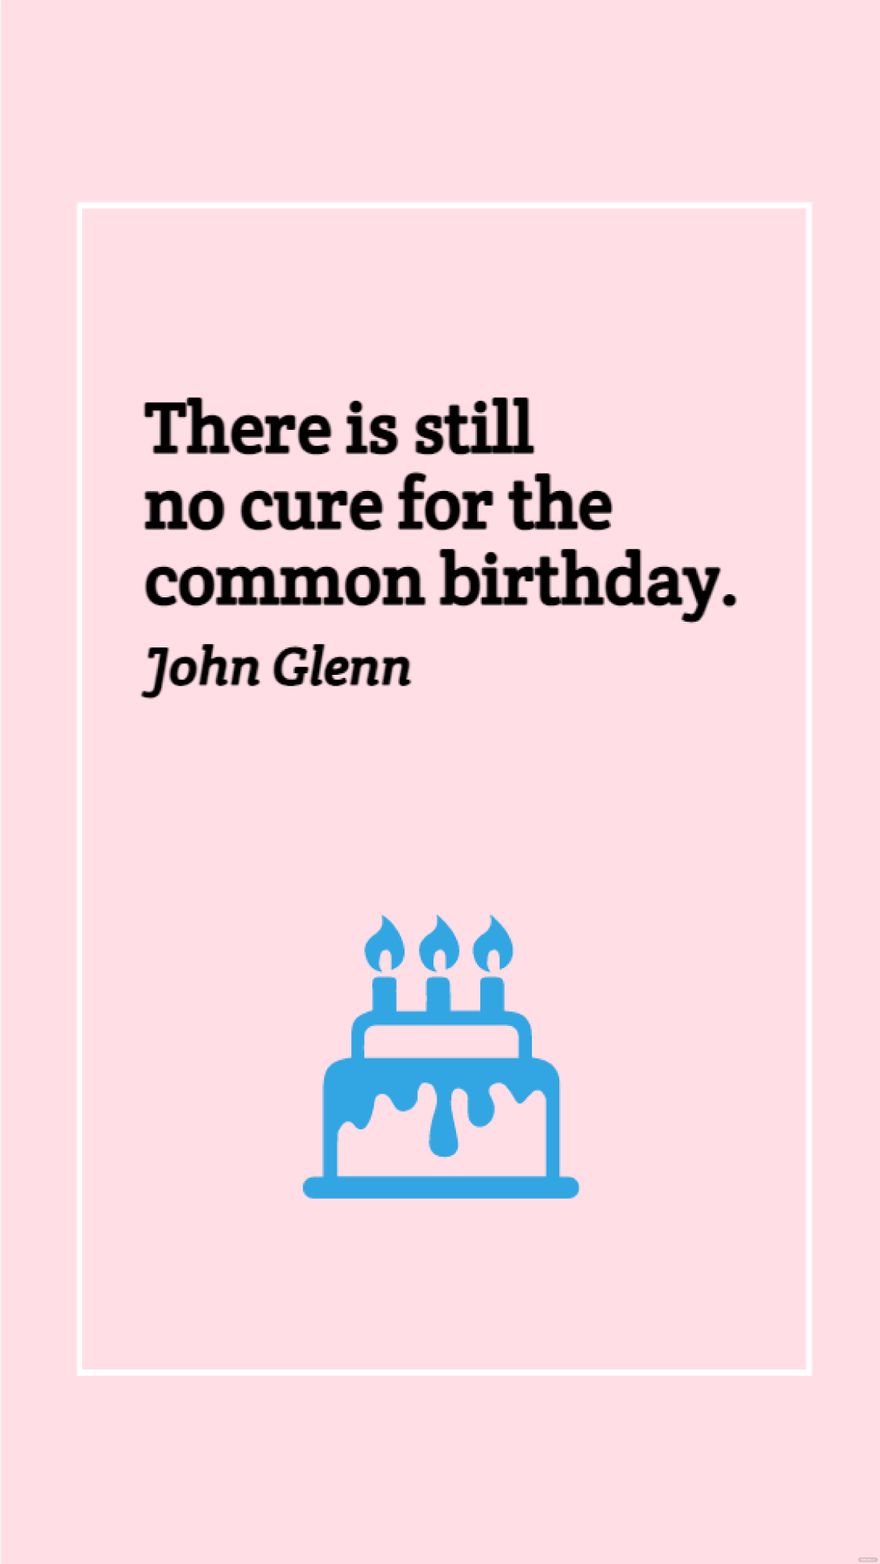 Free John Glenn - There is still no cure for the common birthday. in JPG